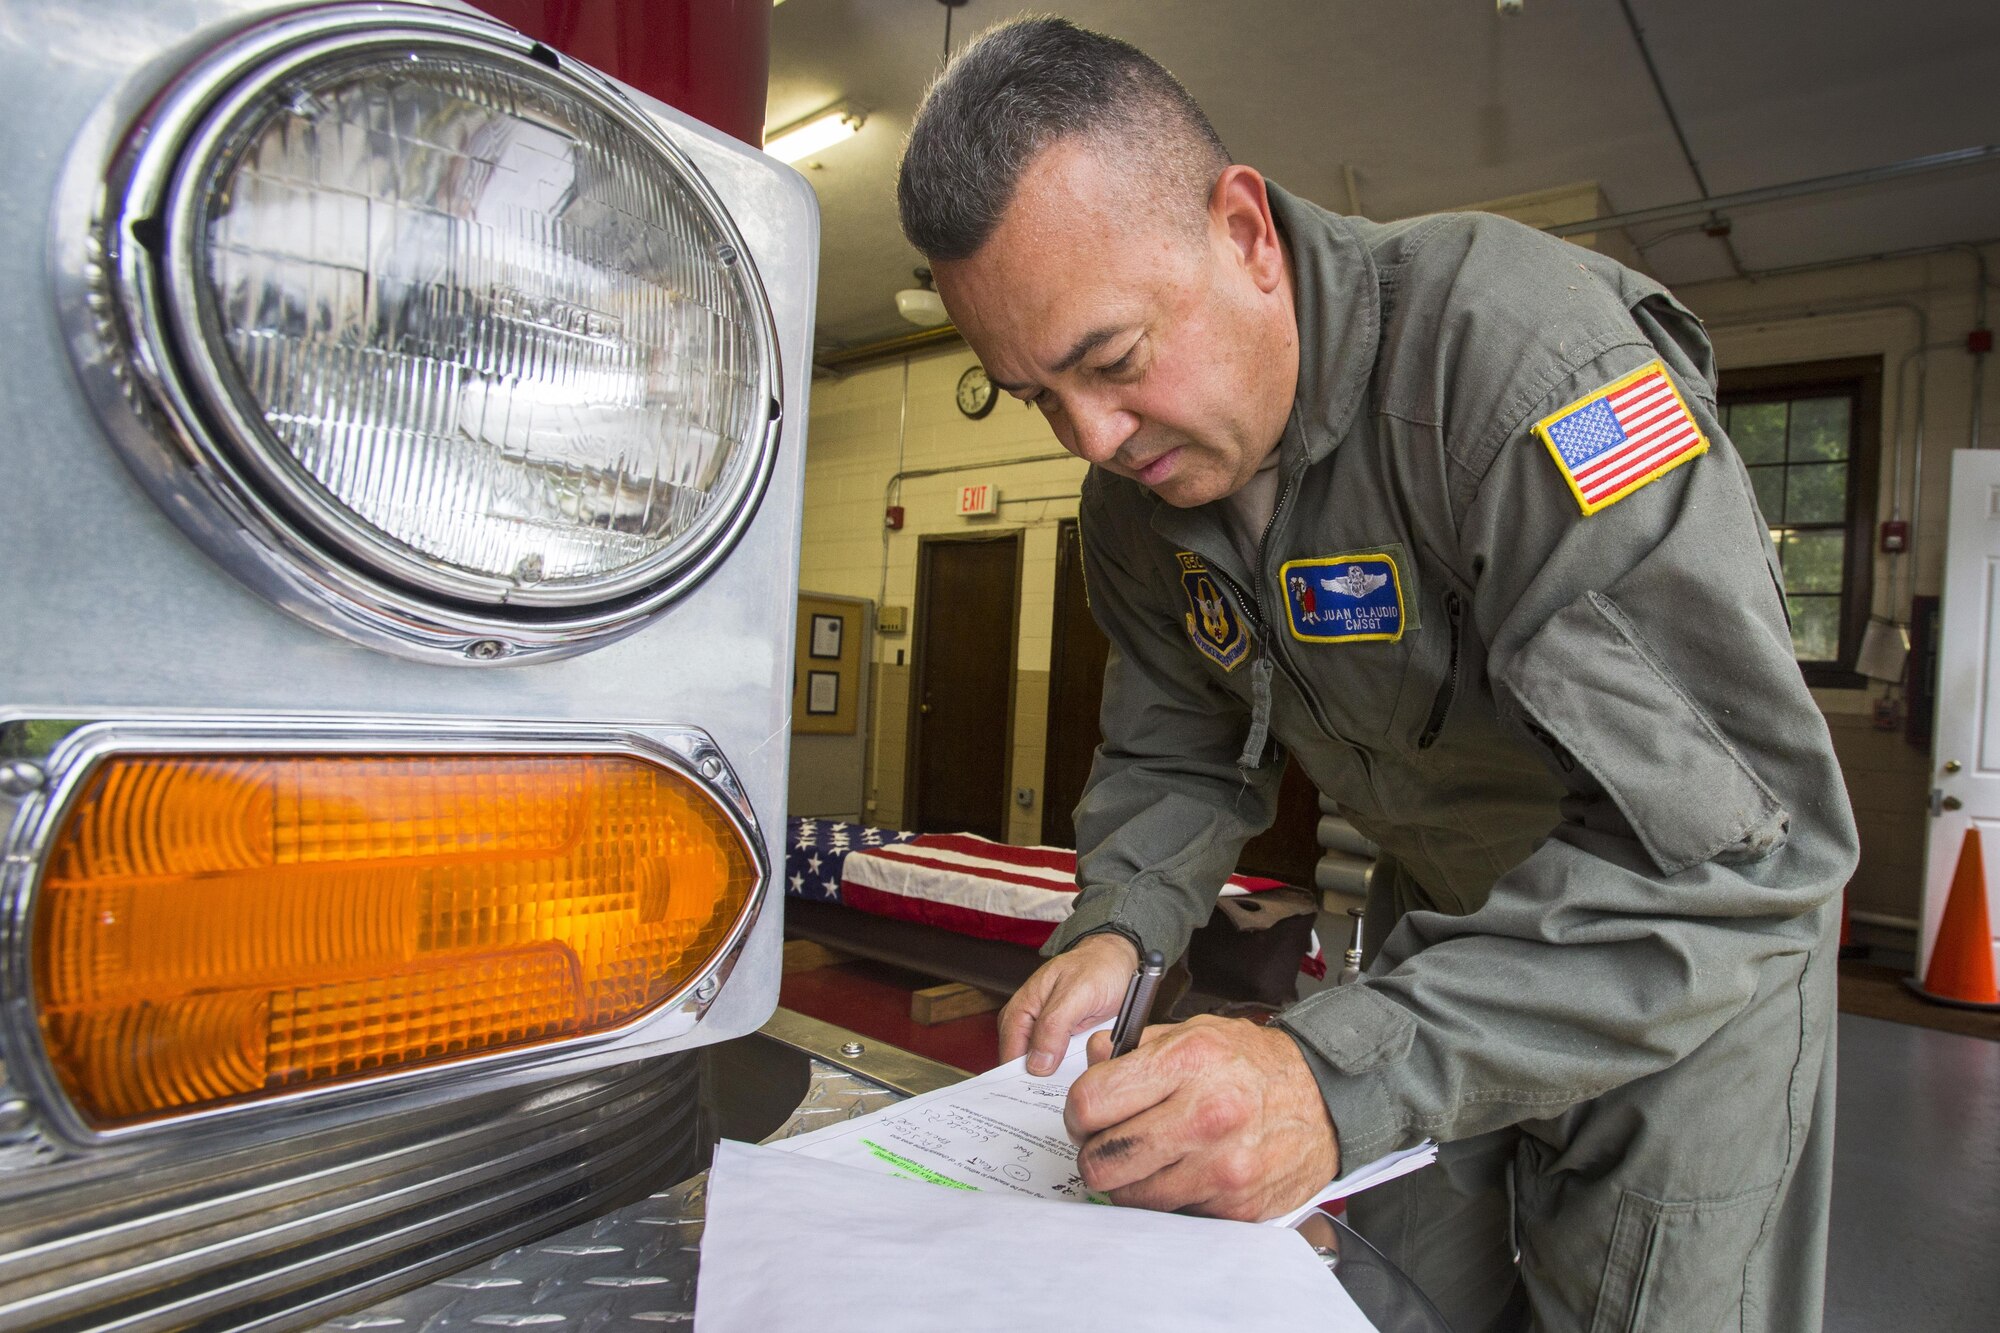 Chief Master Sgt. Juan Claudio, a loadmaster with the 514th Air Mobility Wing, Air Force Reserve, writes the final measurements for a 1982 Mack 1250 GPM pumper fire truck at Mercer Engine No. 3 fire department in Princeton, N.J., July 13, 2016. The fire truck is being donated to a group of volunteer firefighters in Managua, Nicaragua through the Denton Program, which allows U.S. citizens and organizations to use space available on military cargo aircraft to transport humanitarian goods to countries in need. (U.S. Air National Guard photo by Master Sgt. Mark C. Olsen/Released)